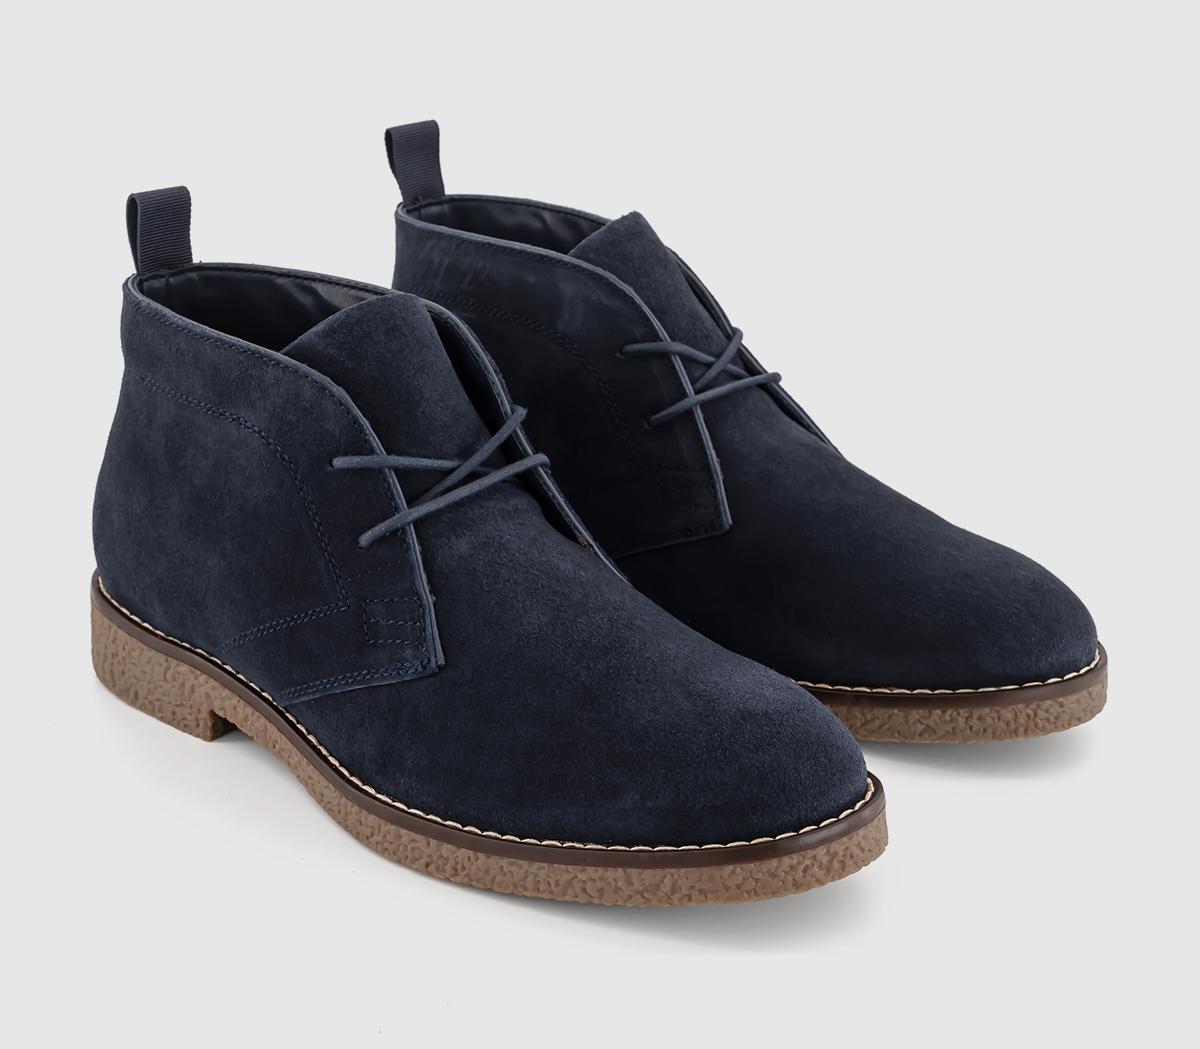 OFFICE Mens Byron Suede Desert Boots Navy Blue, 6